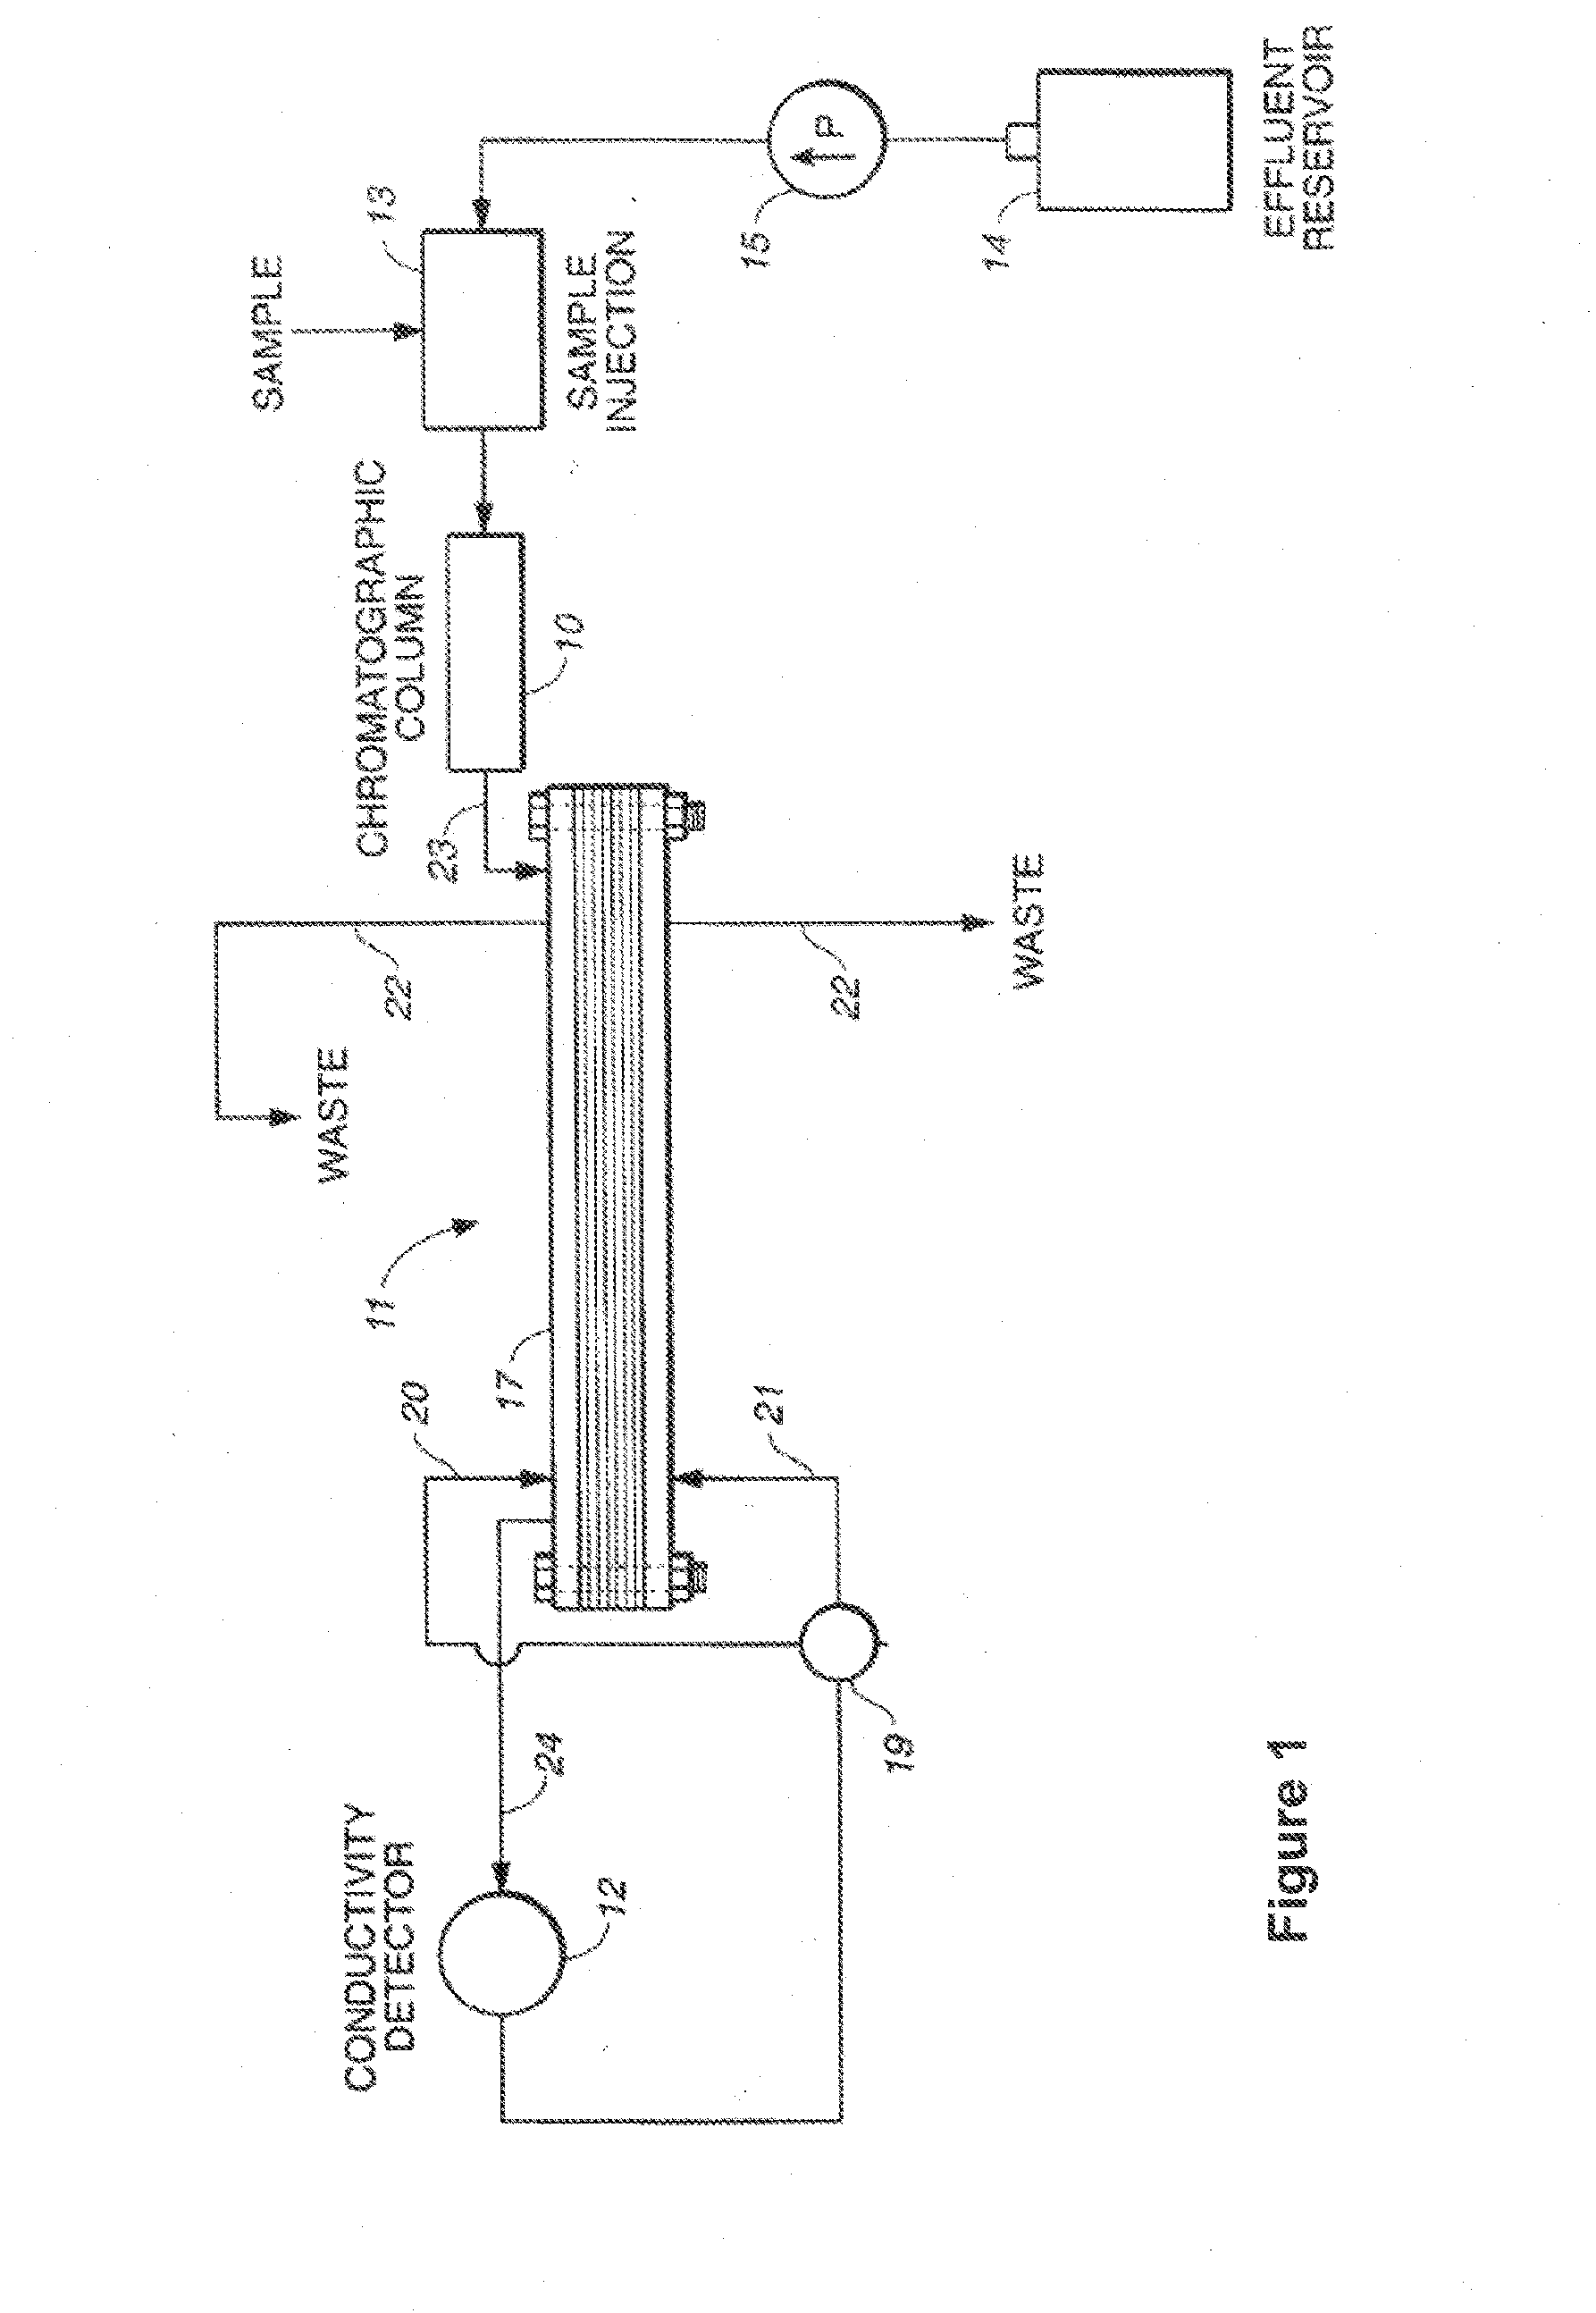 Current efficient electrolytic device and method